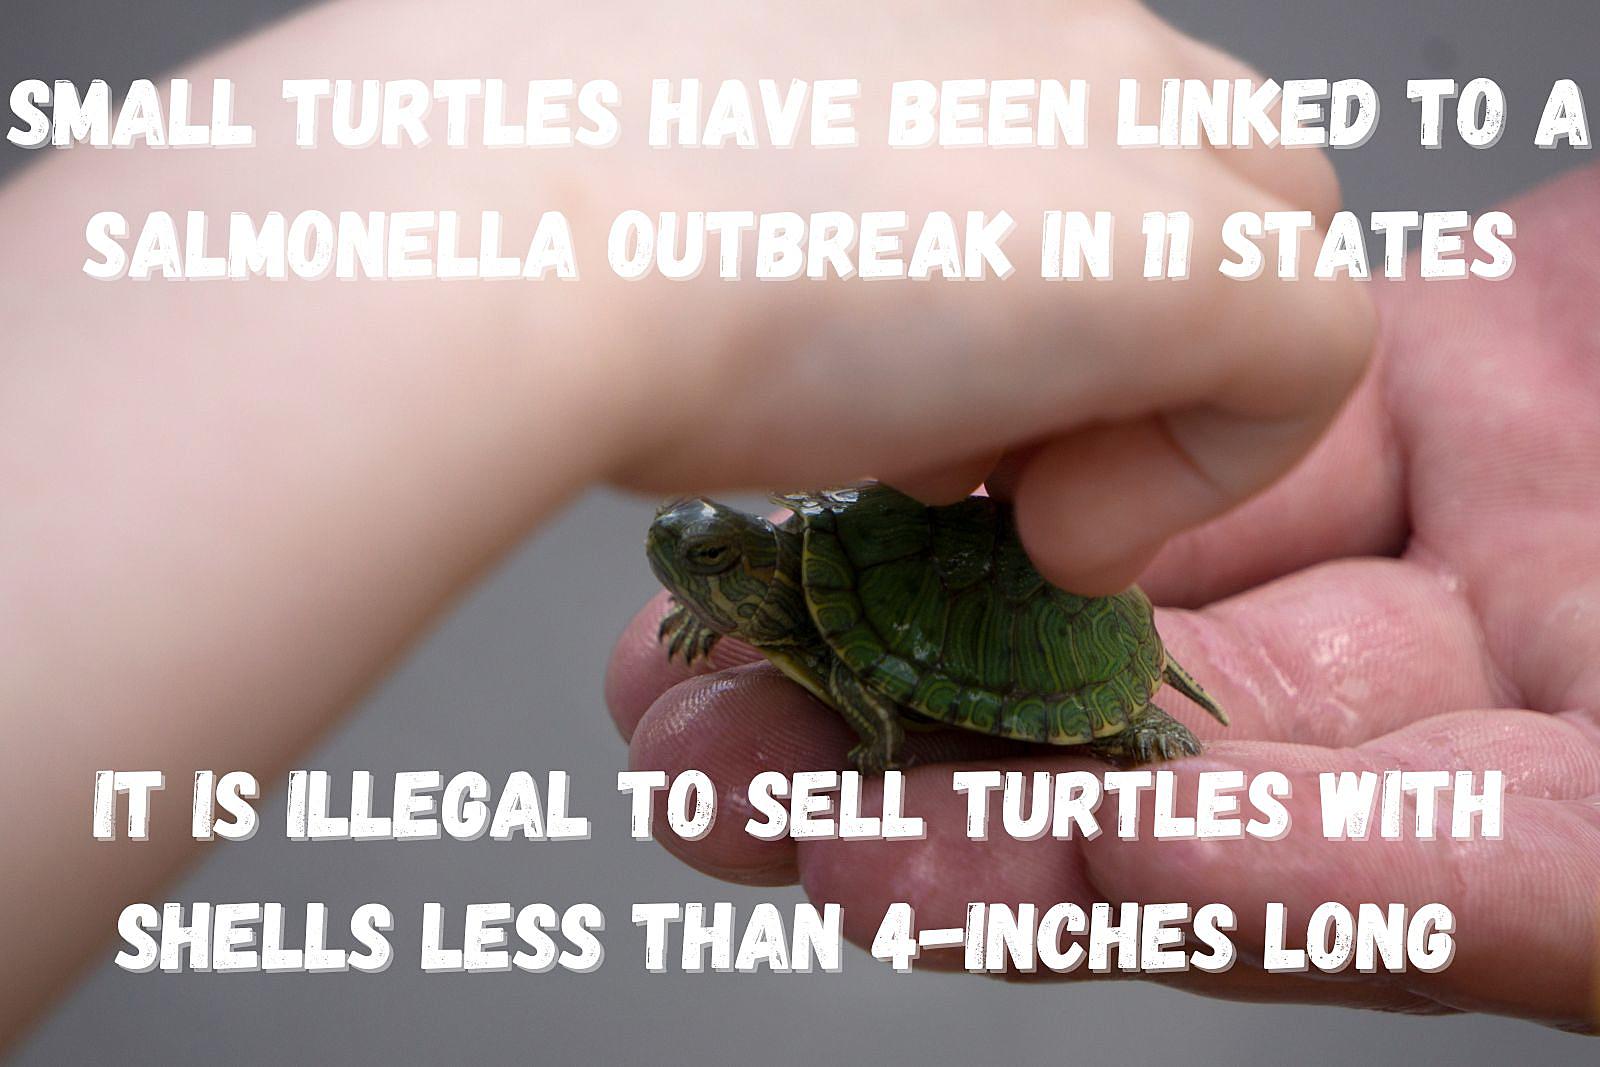 At Least 26 People Sickened by Salmonella Outbreak Linked to Turtles